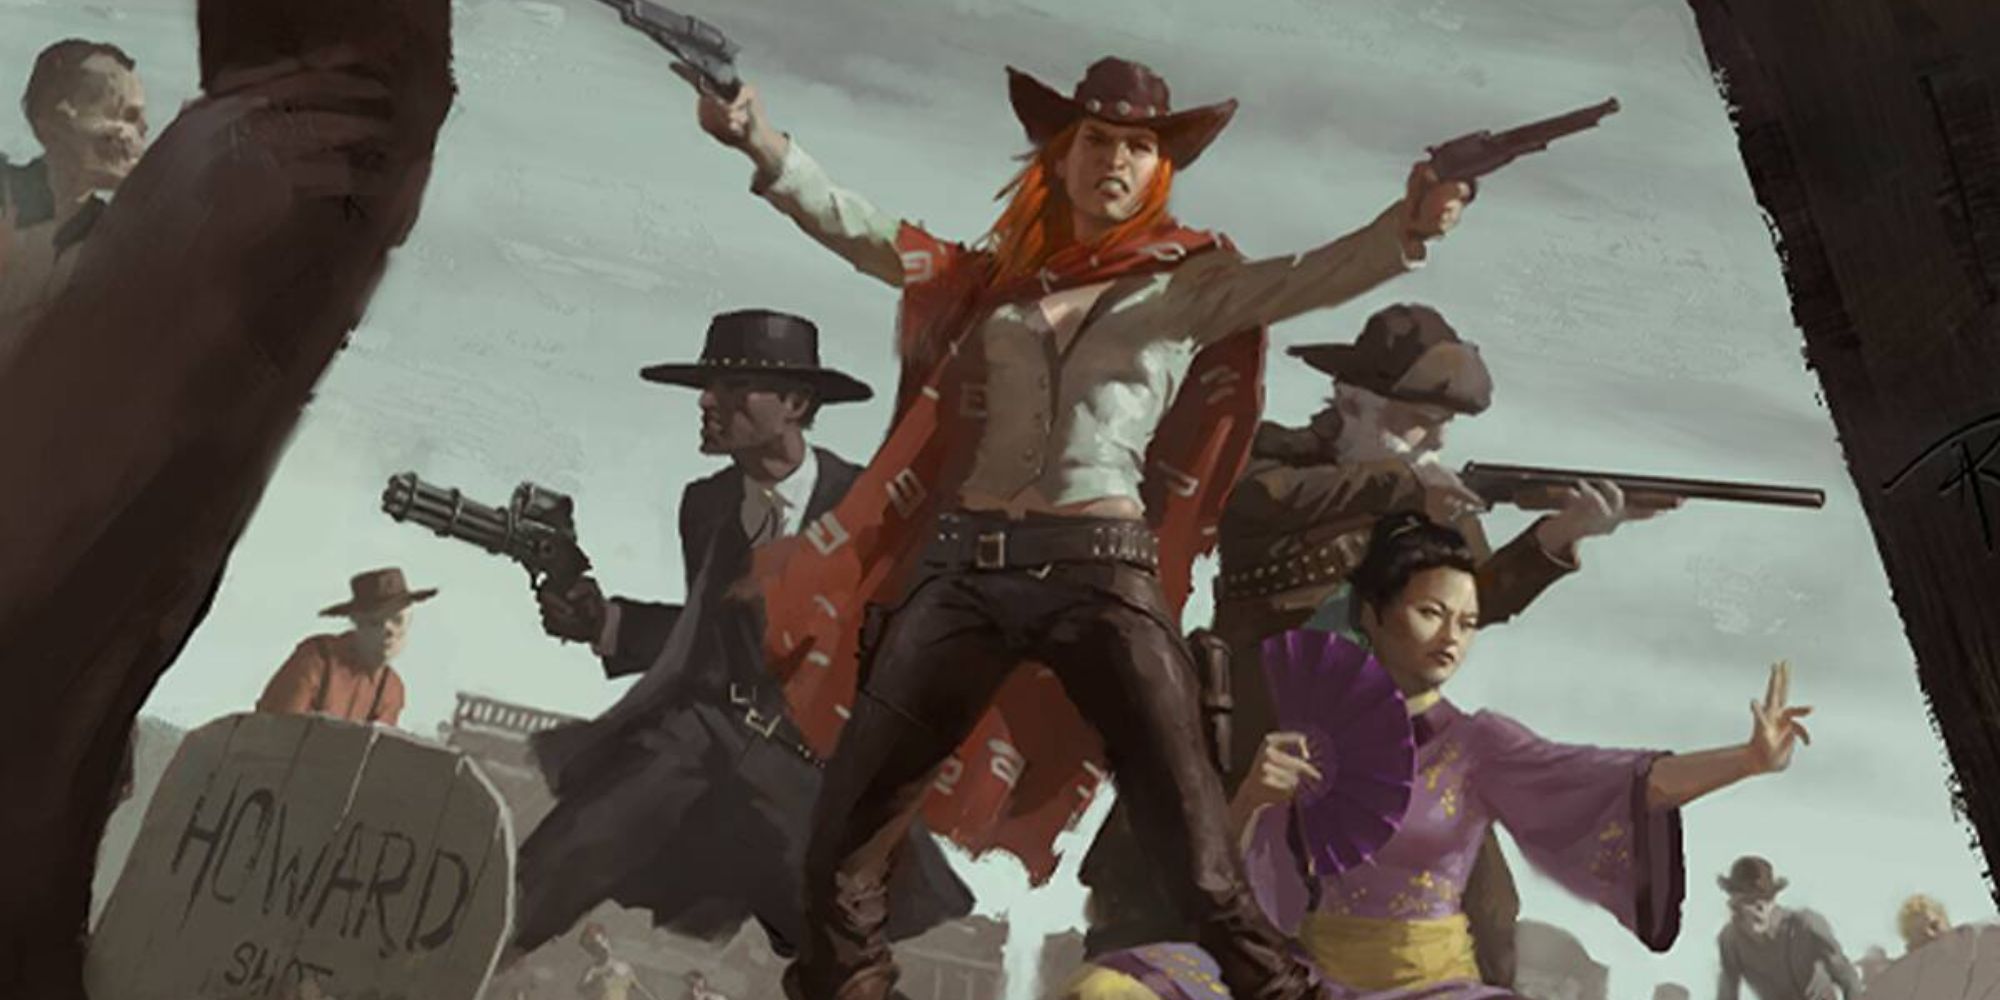 Deadlands Artwork characters involved in standoff with revolvers